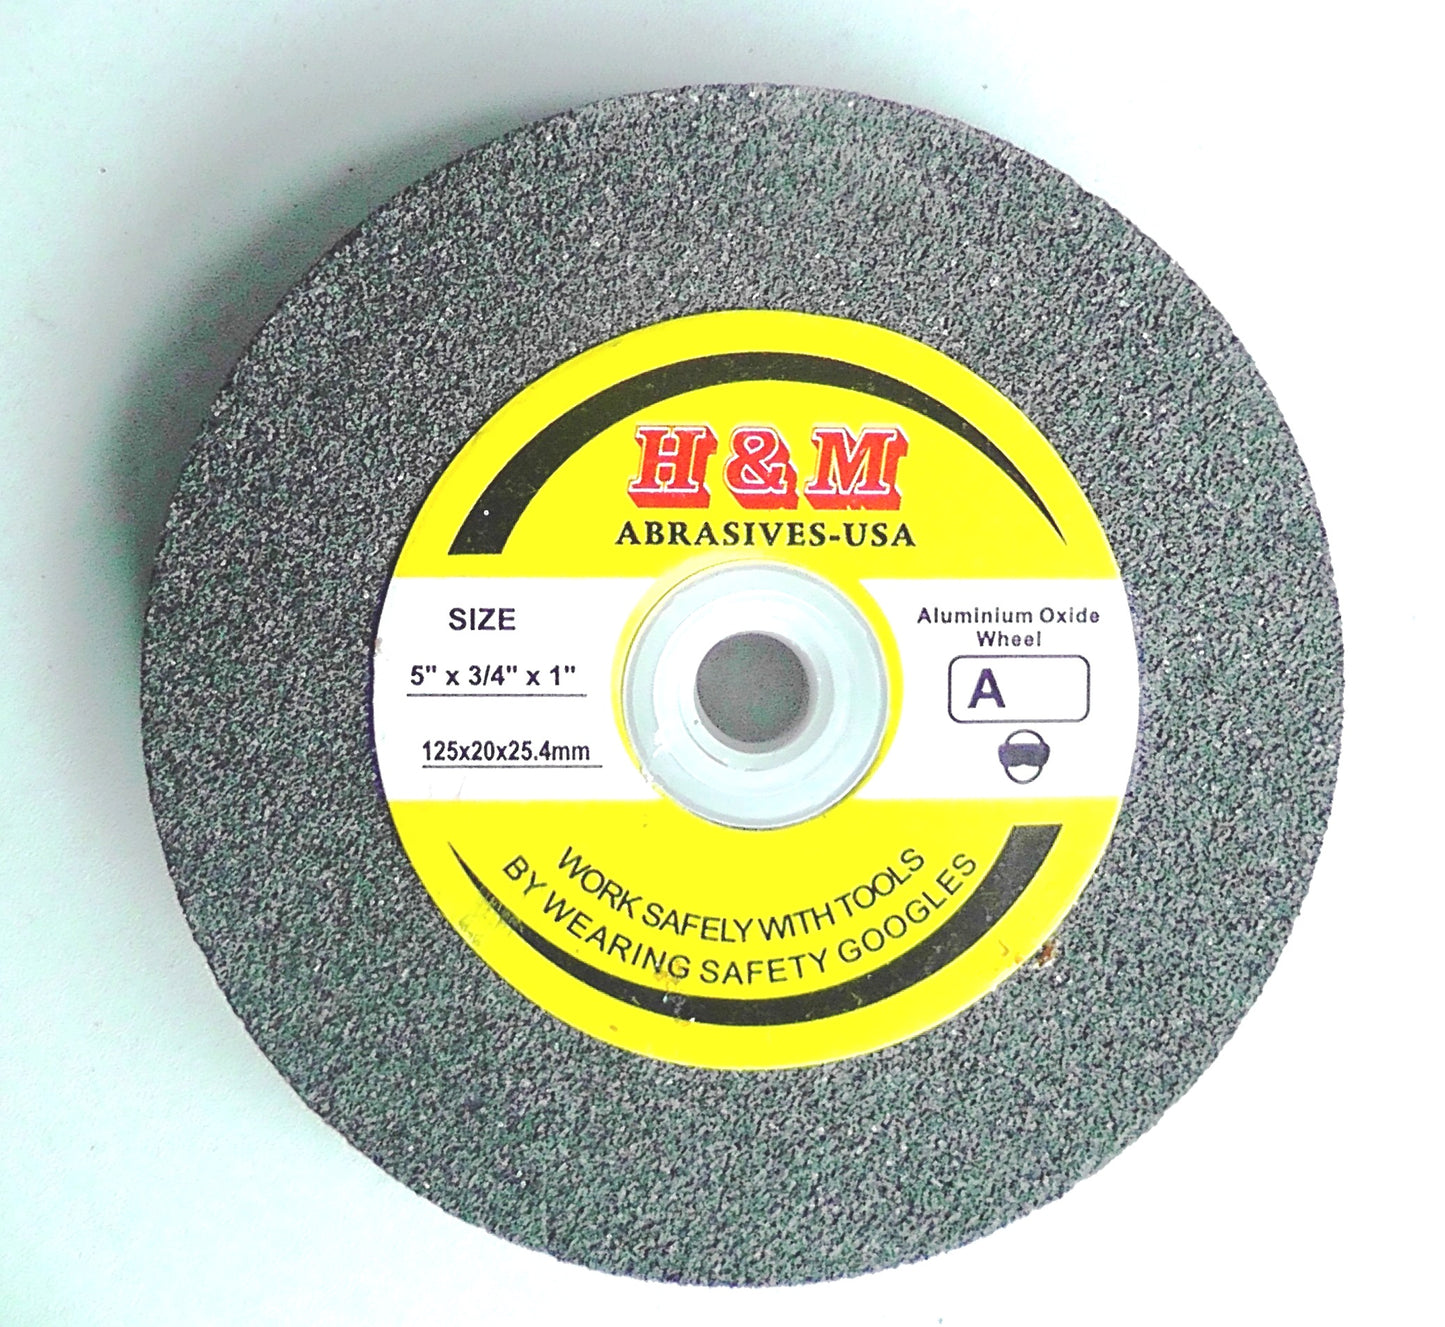 5" 6" 7" 8" 10" 12" BENCH GRINDING WHEEL Vitrified in Volume Discount